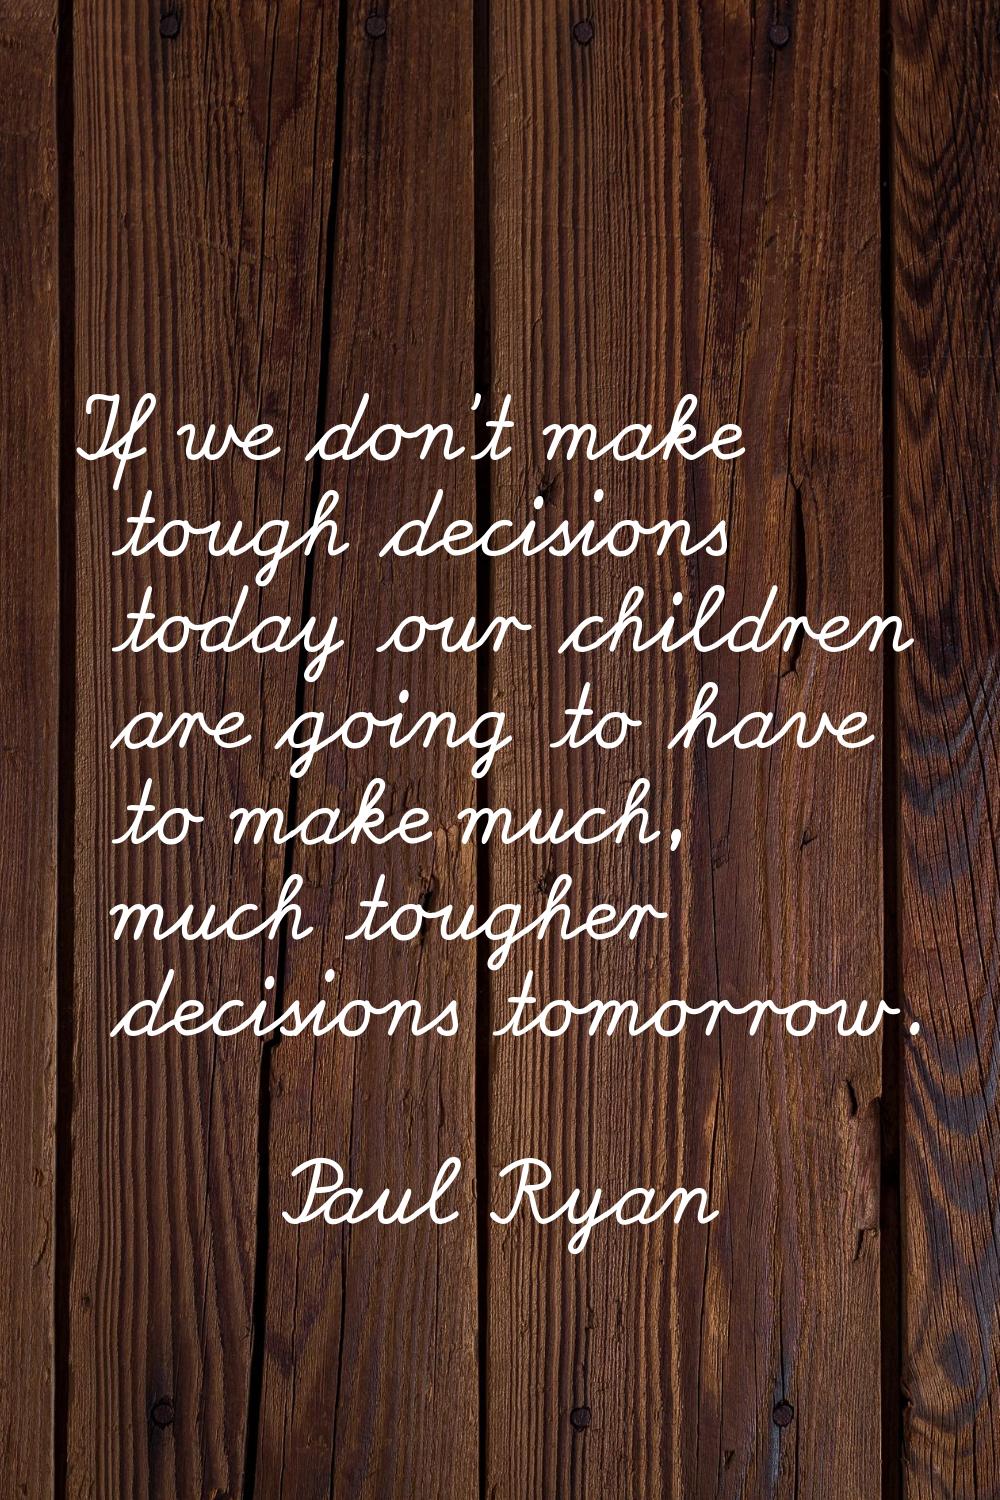 If we don't make tough decisions today our children are going to have to make much, much tougher de